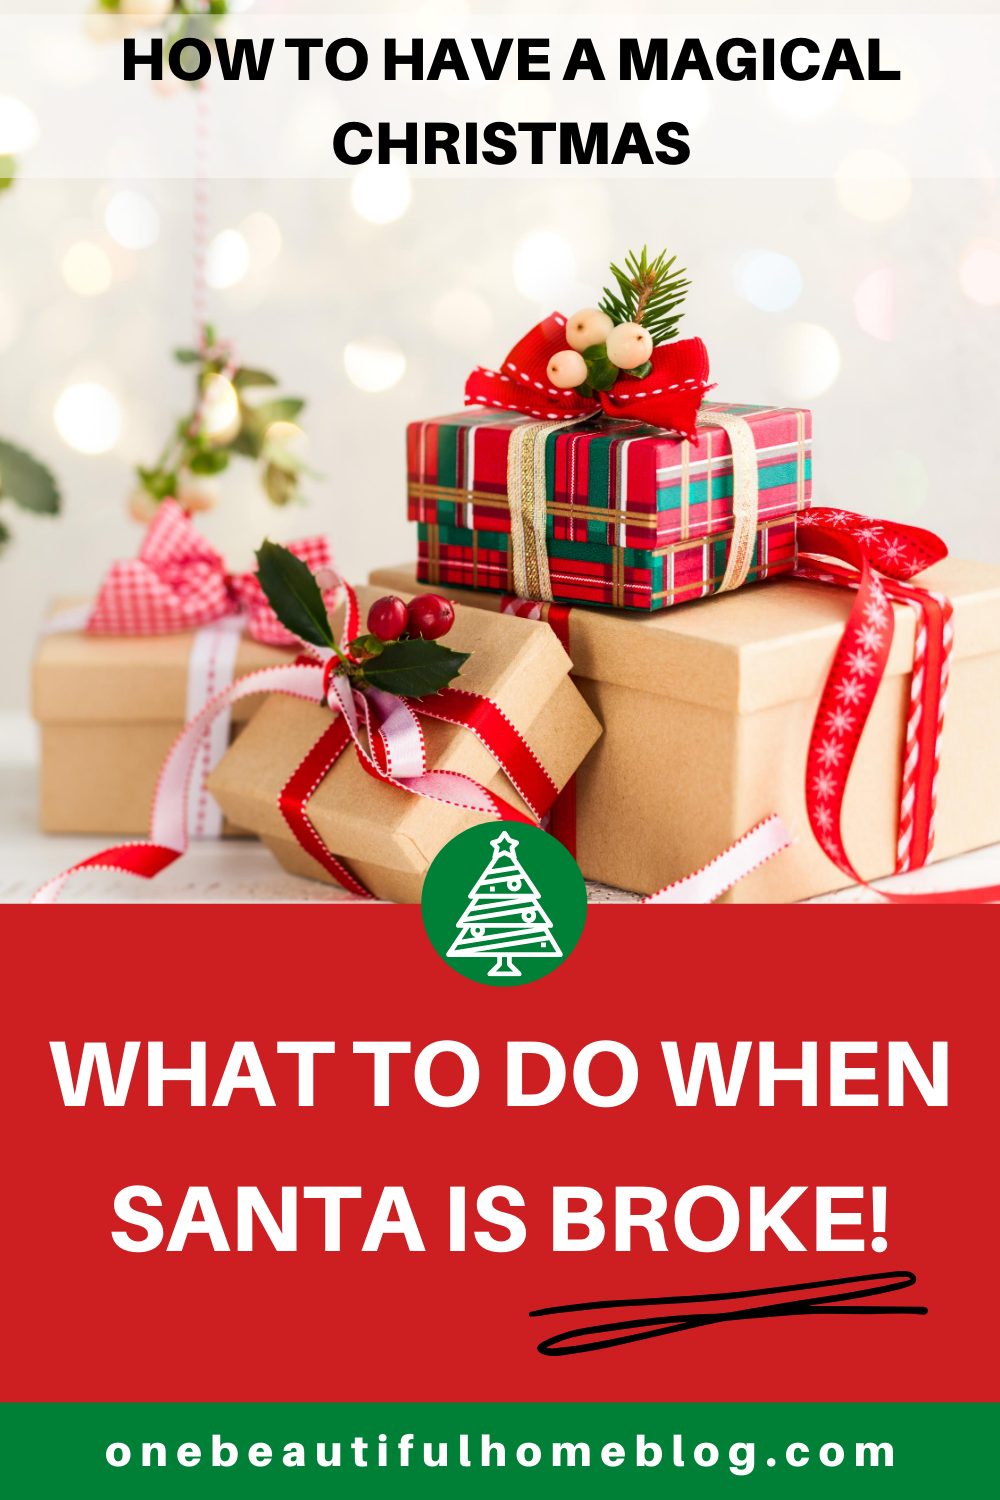 https://www.onebeautifulhomeblog.com/wp-content/uploads/2015/09/How-to-have-a-Magical-Christmas-with-little-to-no-money-4.png